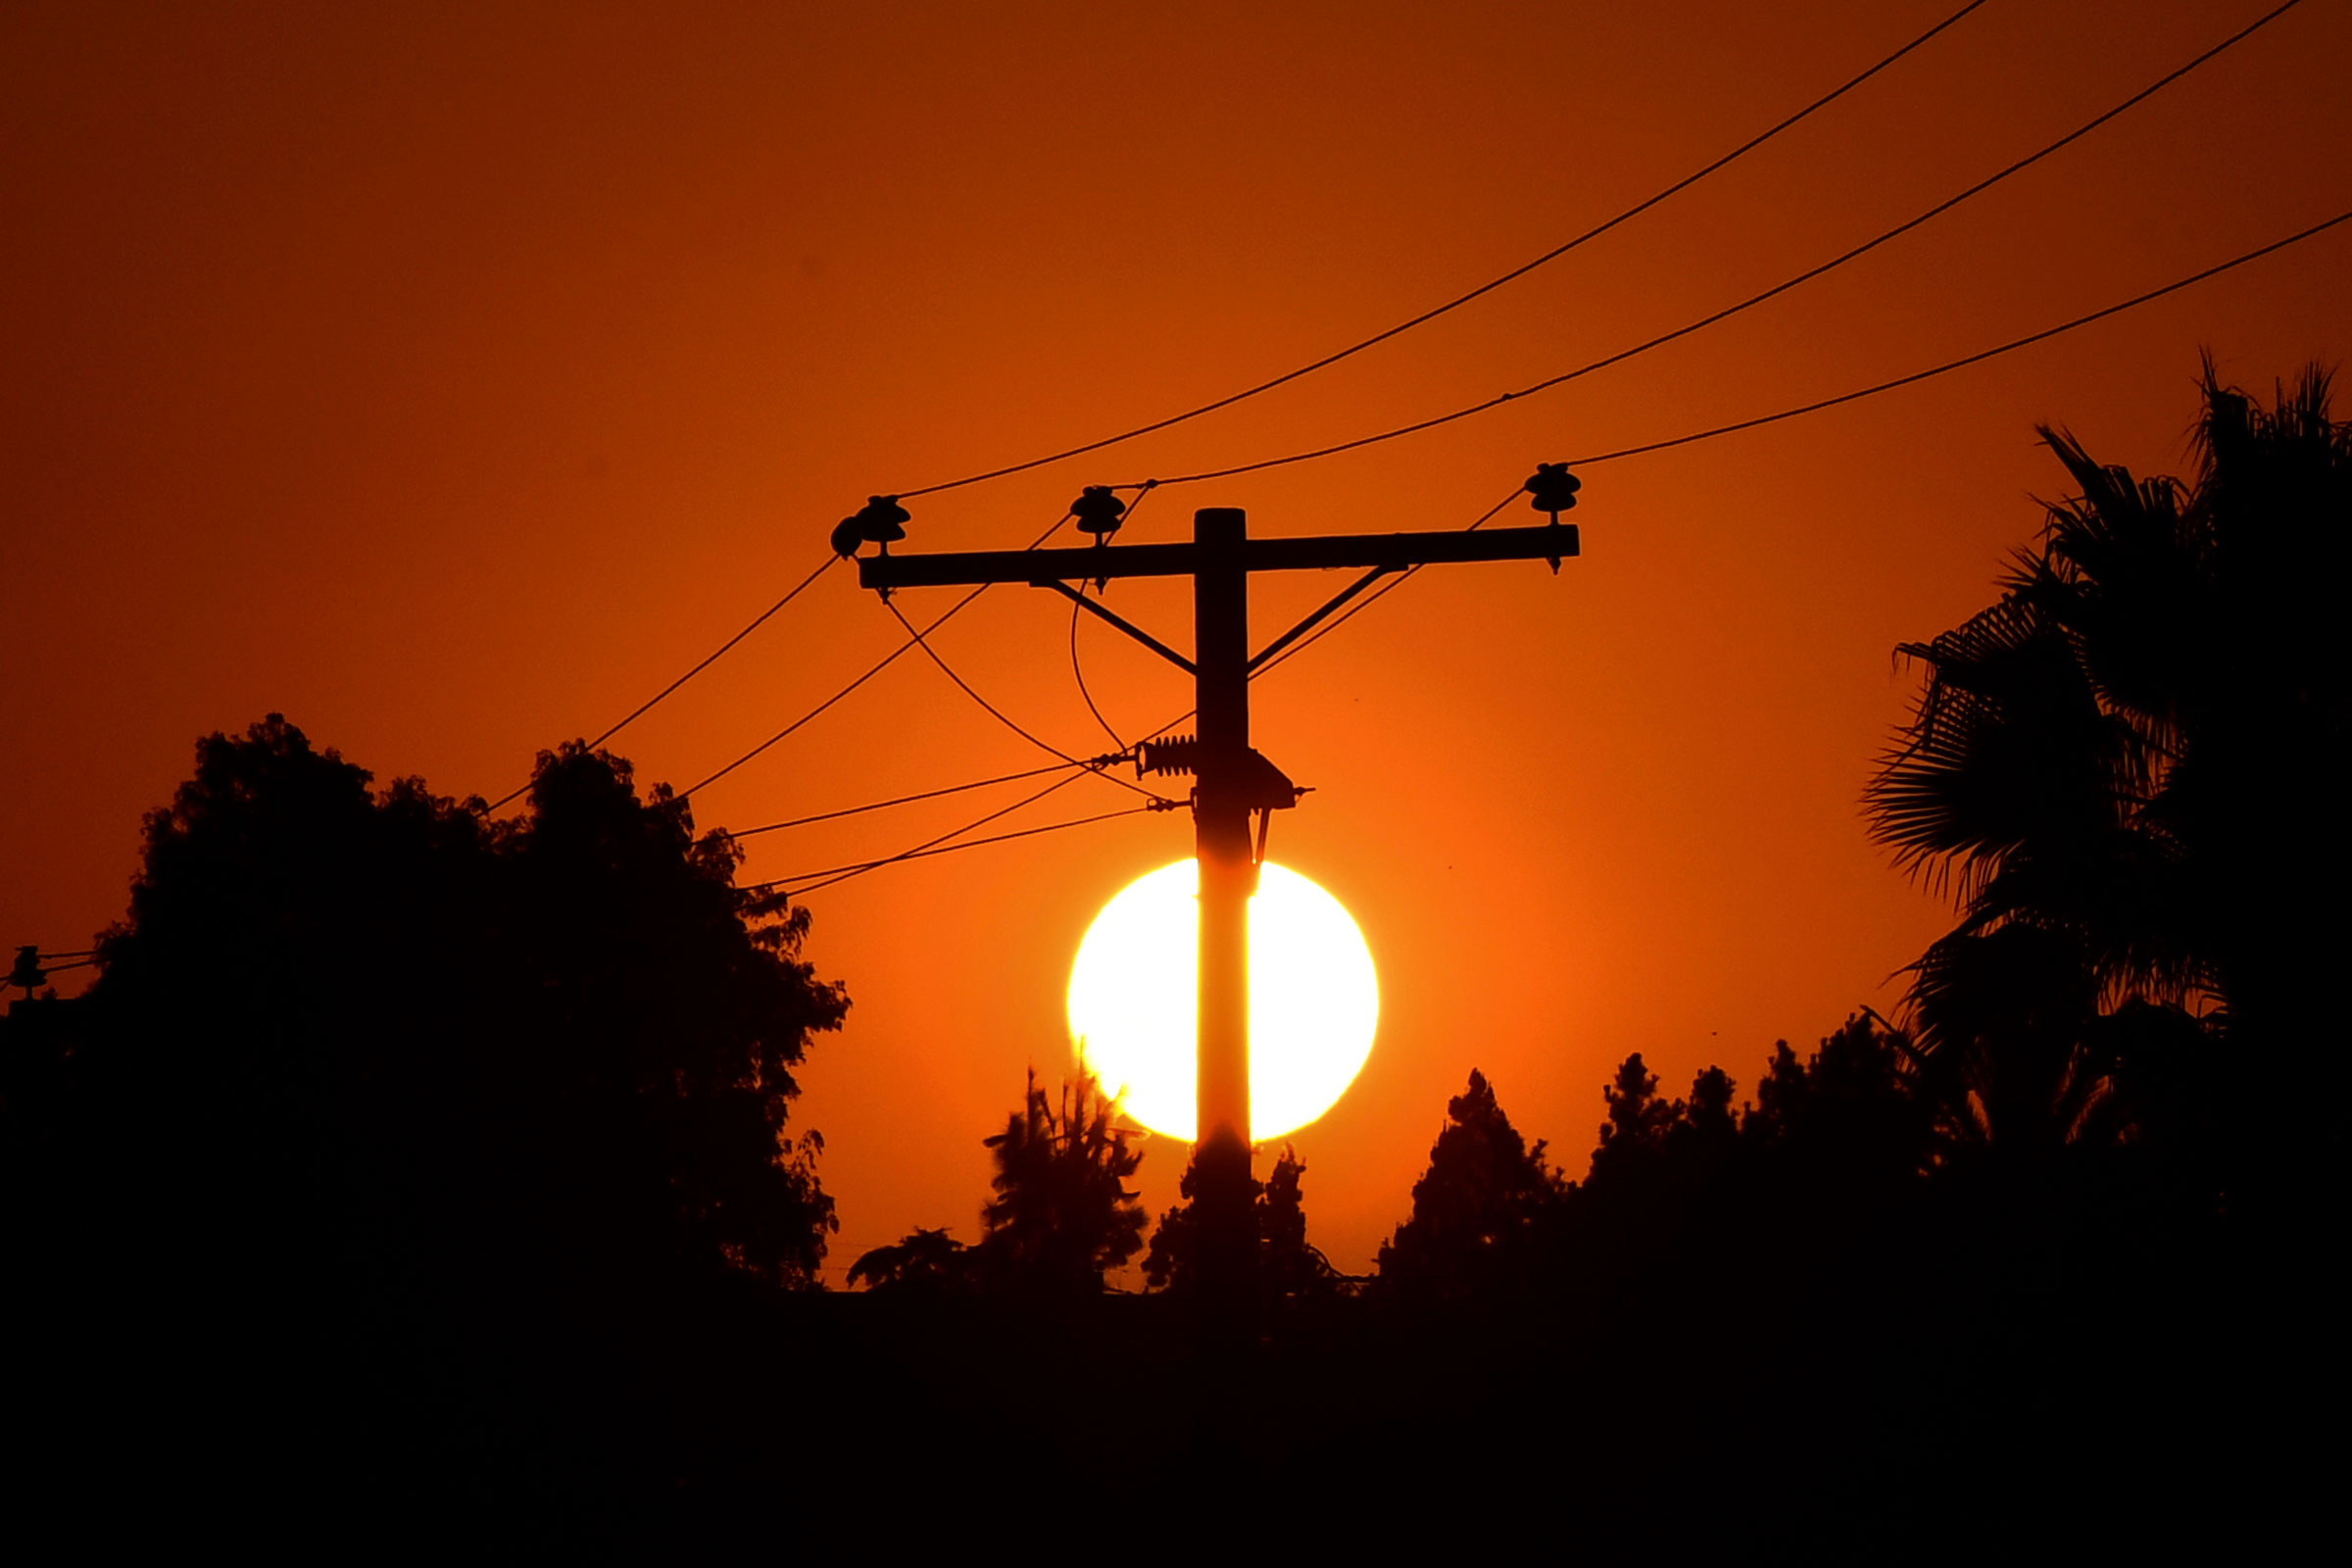 The sun sets behind power lines in Los Angeles, Calif. on Sept. 3, 2020. (Frederic J. Brown—AFP/Getty Images)